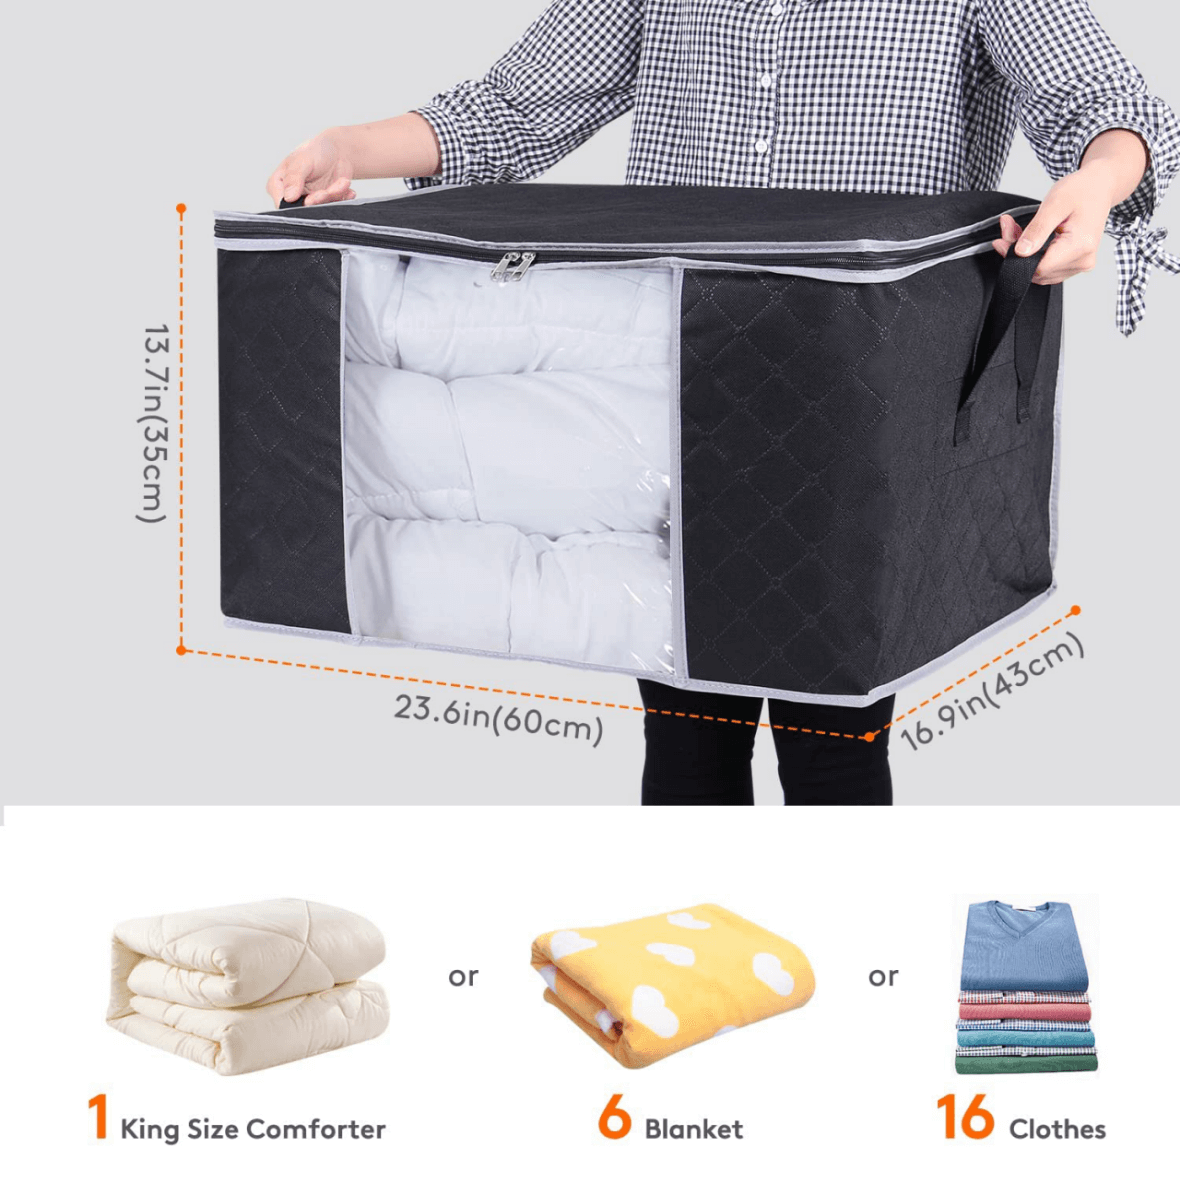 Lifewit Large Storage Bags Organizer for Clothes, Blankets, 90L, 3